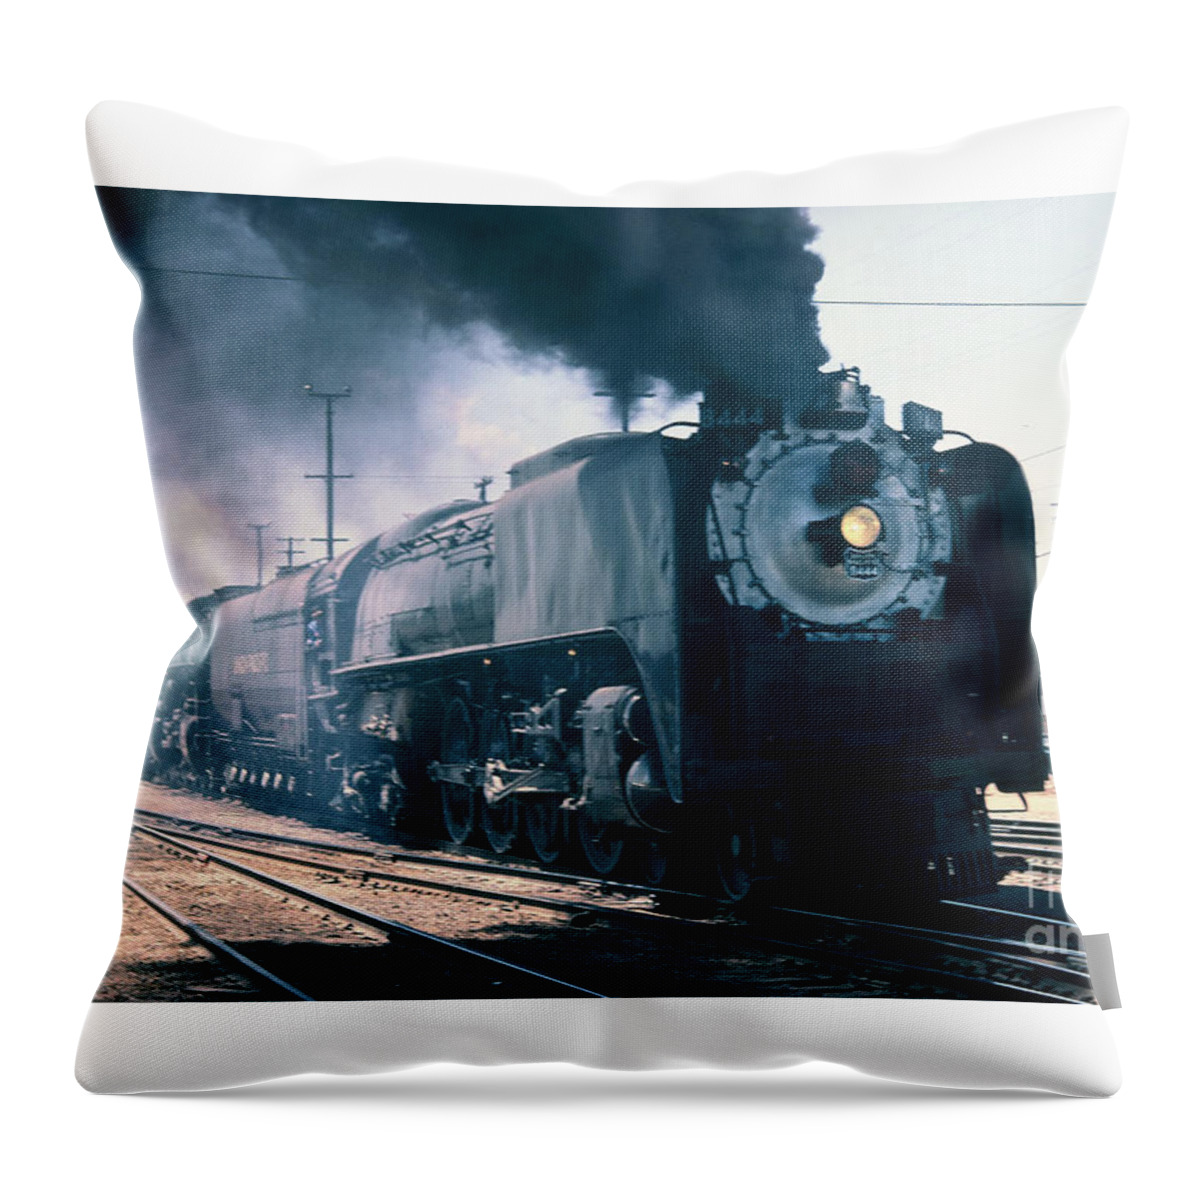 Train Throw Pillow featuring the photograph VINTAGE RAILROAD - Union Pacific 8444 Steam Engine by John and Sheri Cockrell